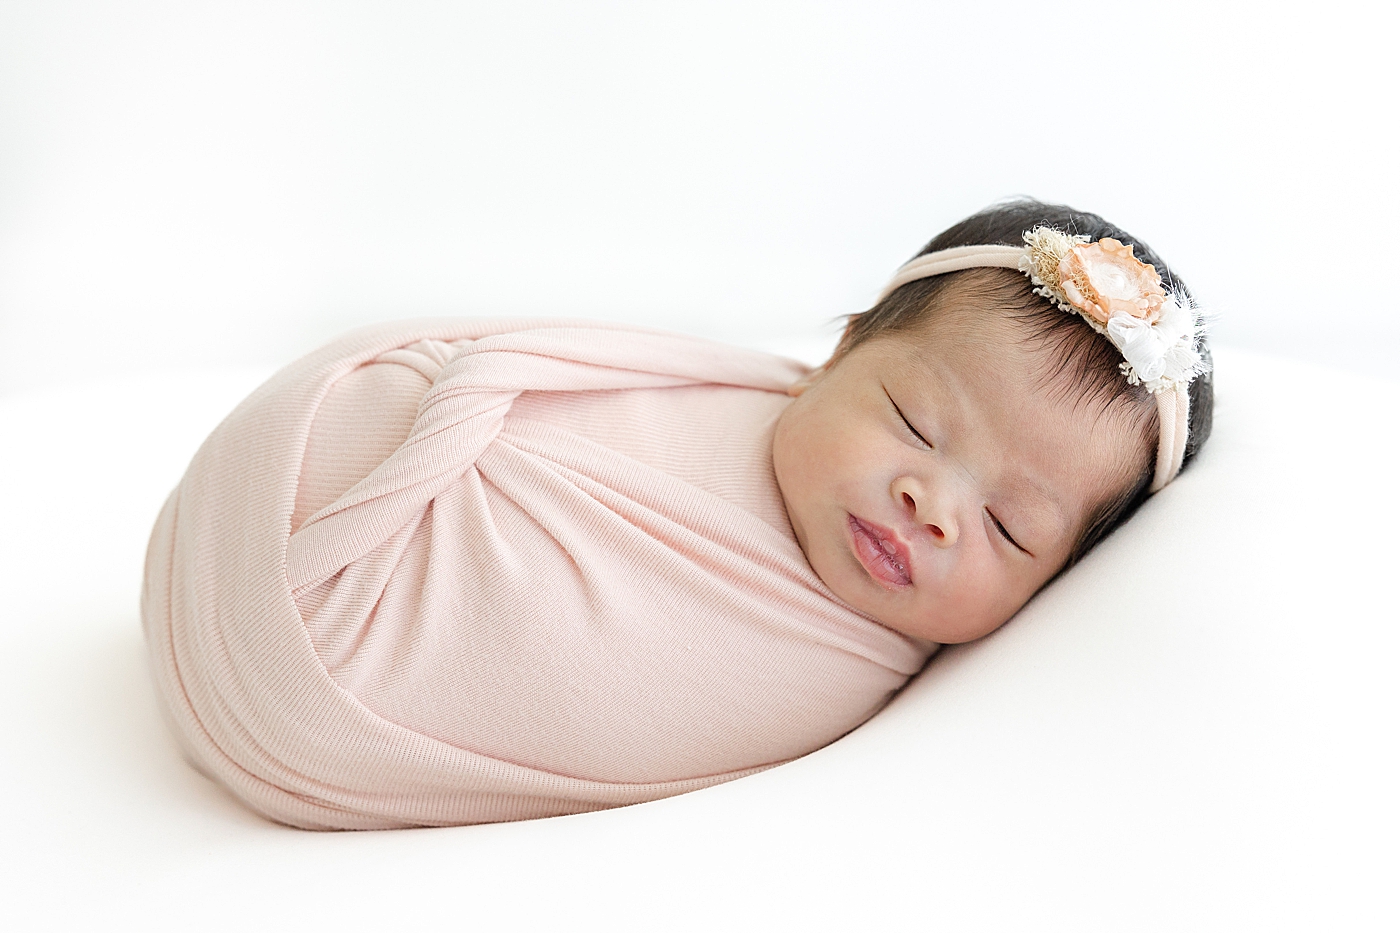 Newborn baby wrapped in a pink swaddle during her Newborn sessions with siblings | Image by Sana Ahmed